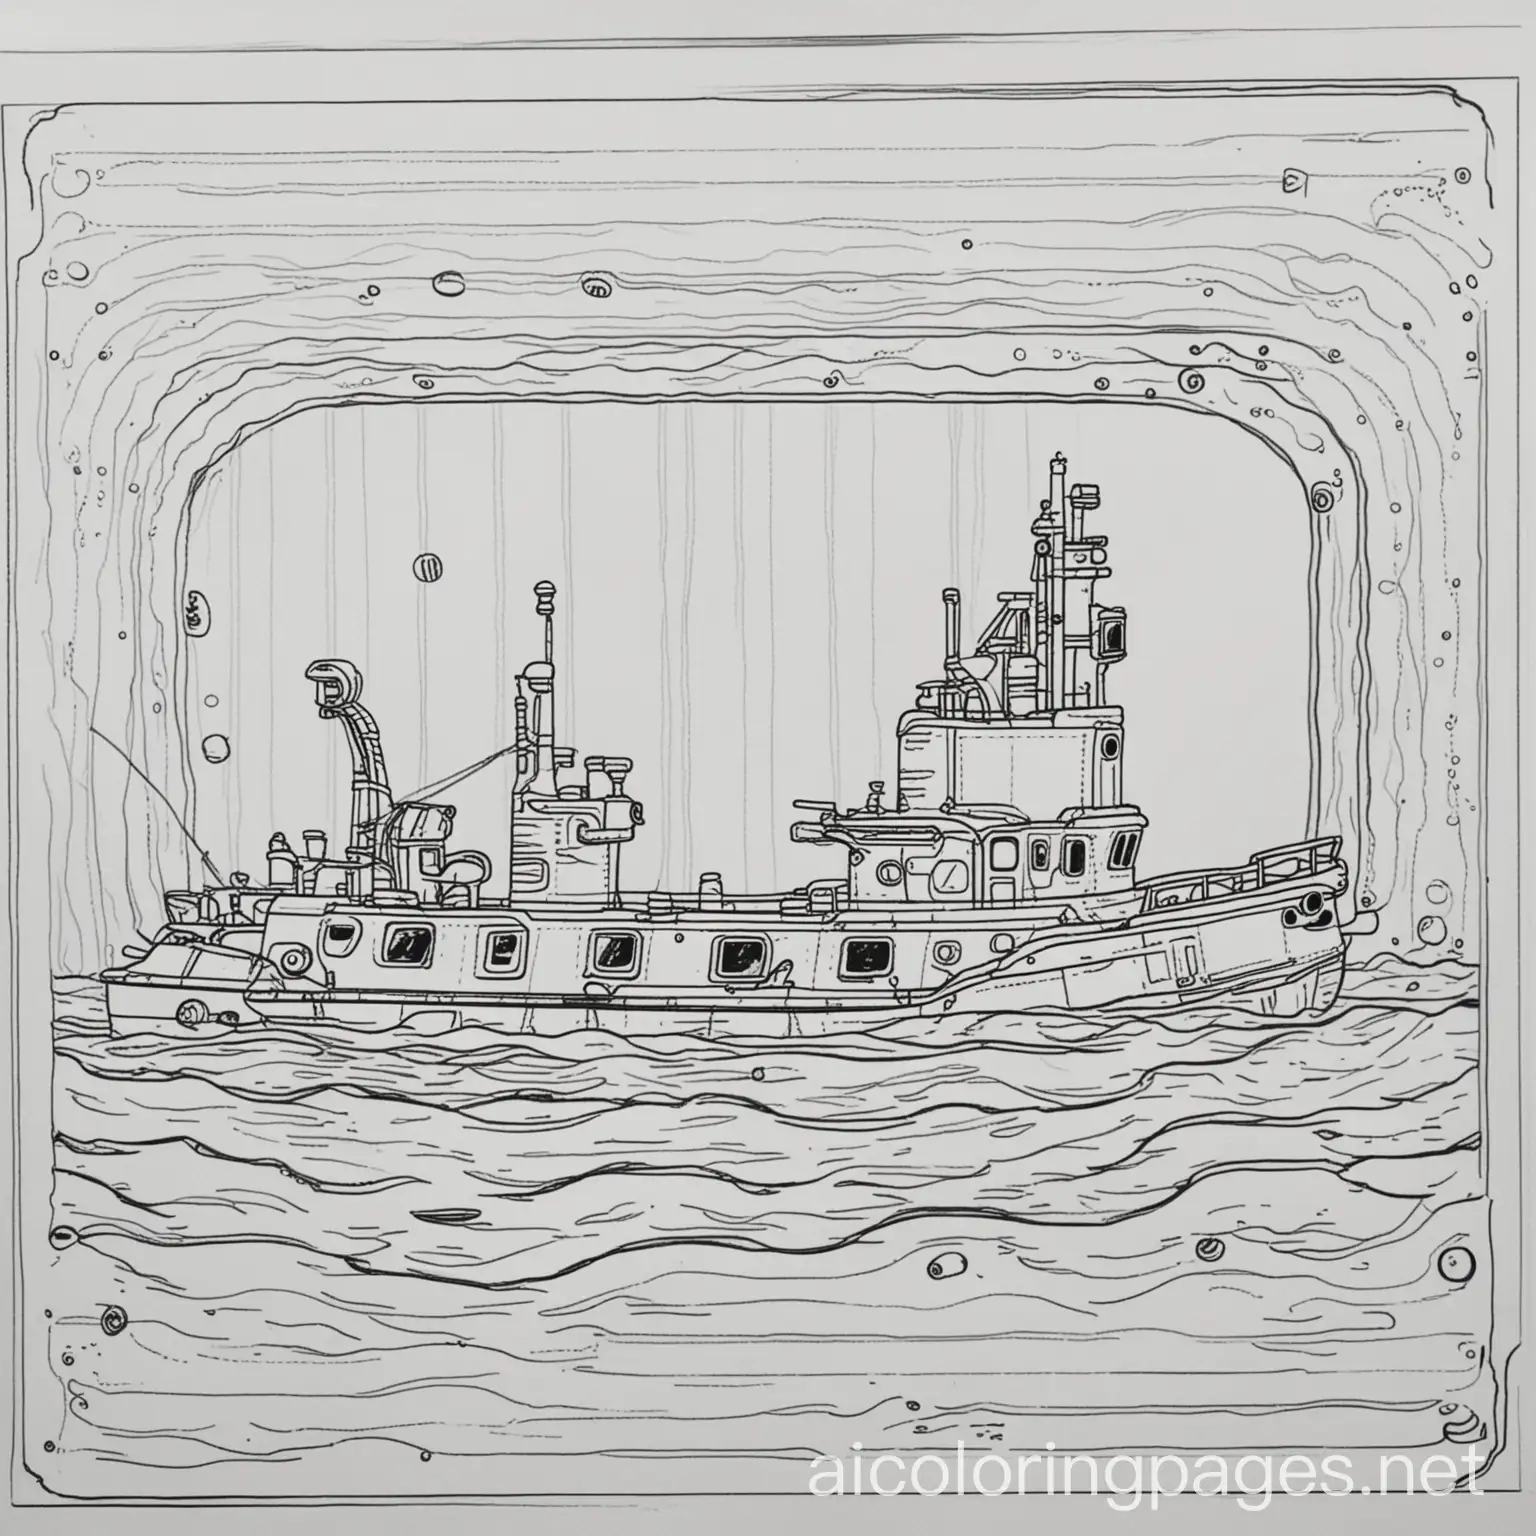 Submarine-with-Screen-Door-Coloring-Page-Absurdity-and-Simplicity-in-Black-and-White-Line-Art